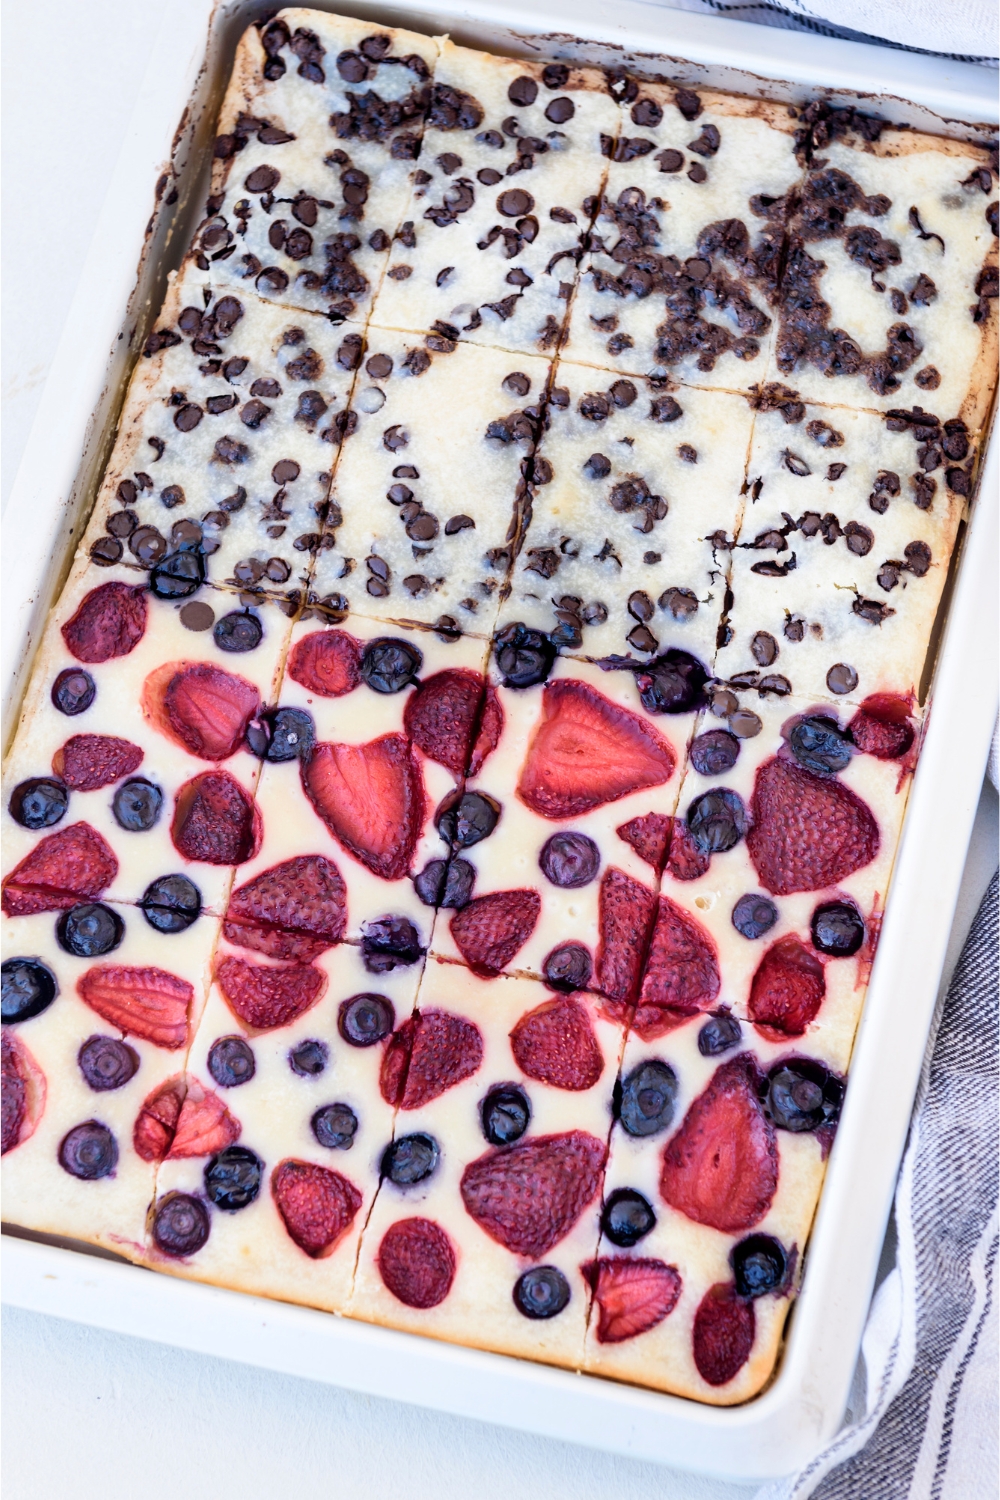 A baking sheet with sliced pancakes topped with chocolate chips, strawberries, and blueberries.